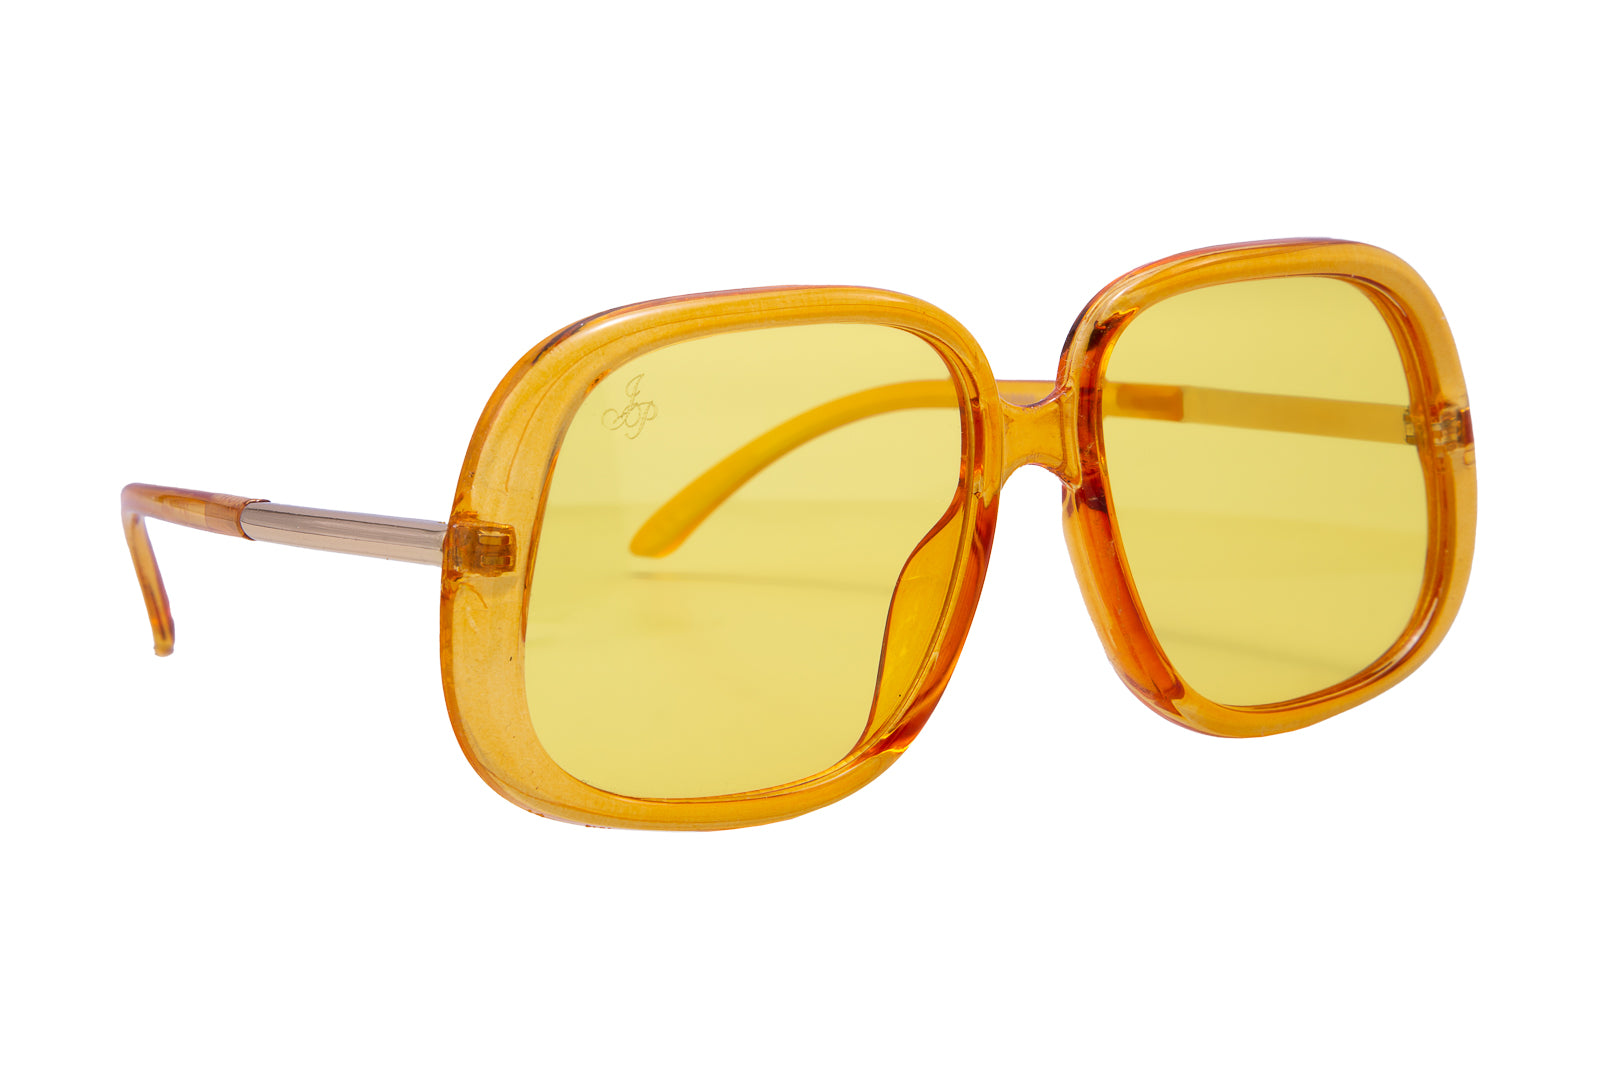 SQUARE FRAME IN YELLOW WITH YELLOW LENSES